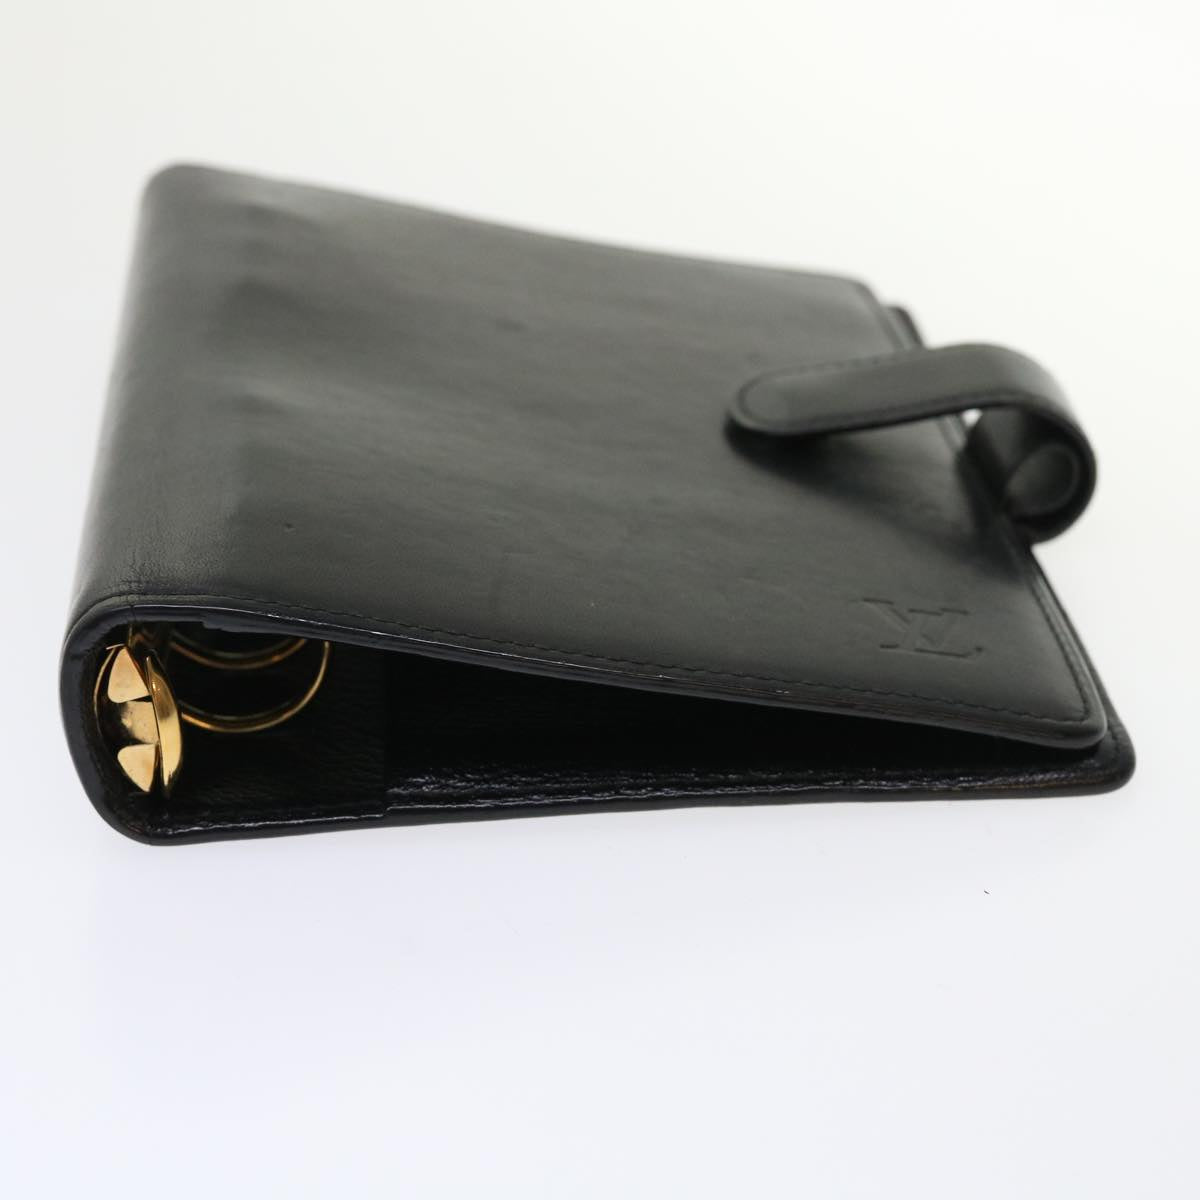 LOUIS VUITTON Nomad Agenda MM Day Planner Cover Black R20478 LV Auth 47243